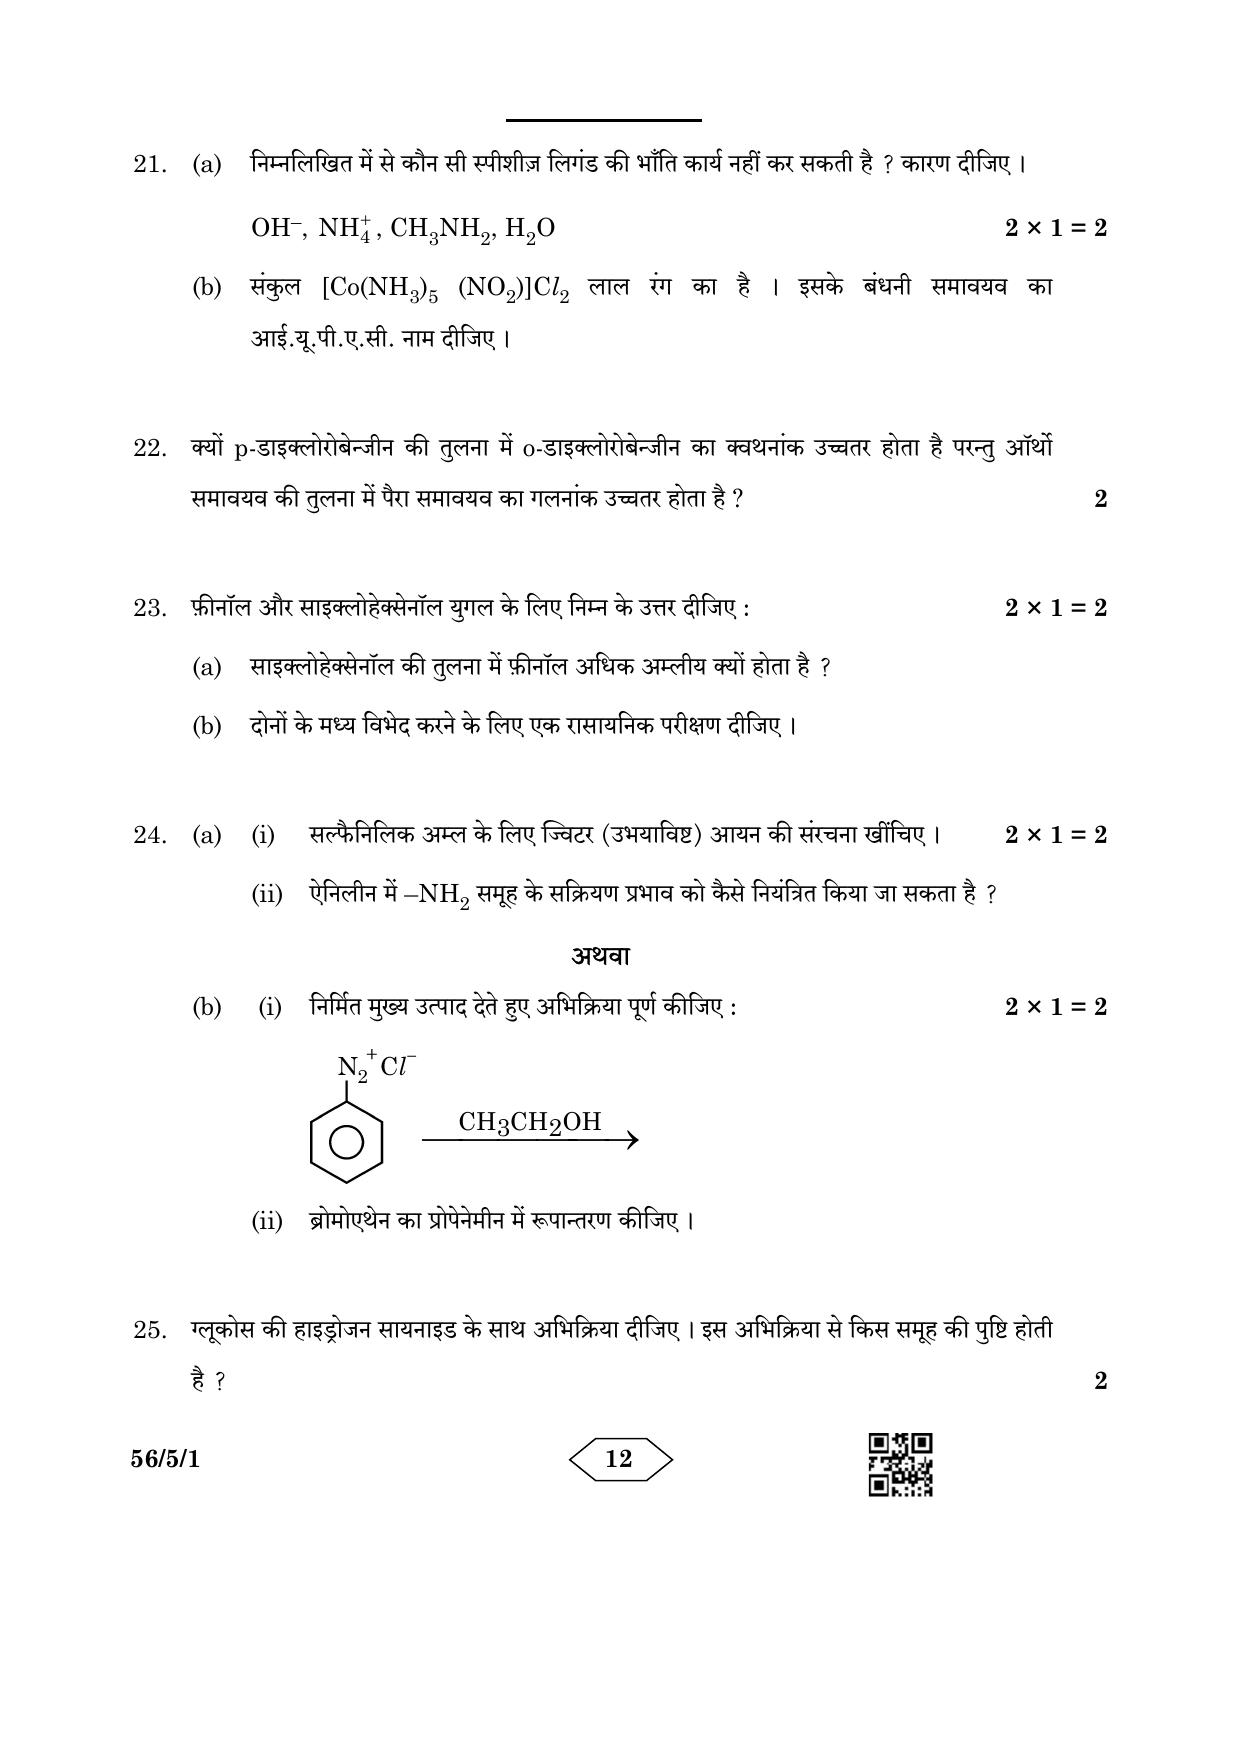 CBSE Class 12 56-5-1 Chemistry 2023 Question Paper - Page 12